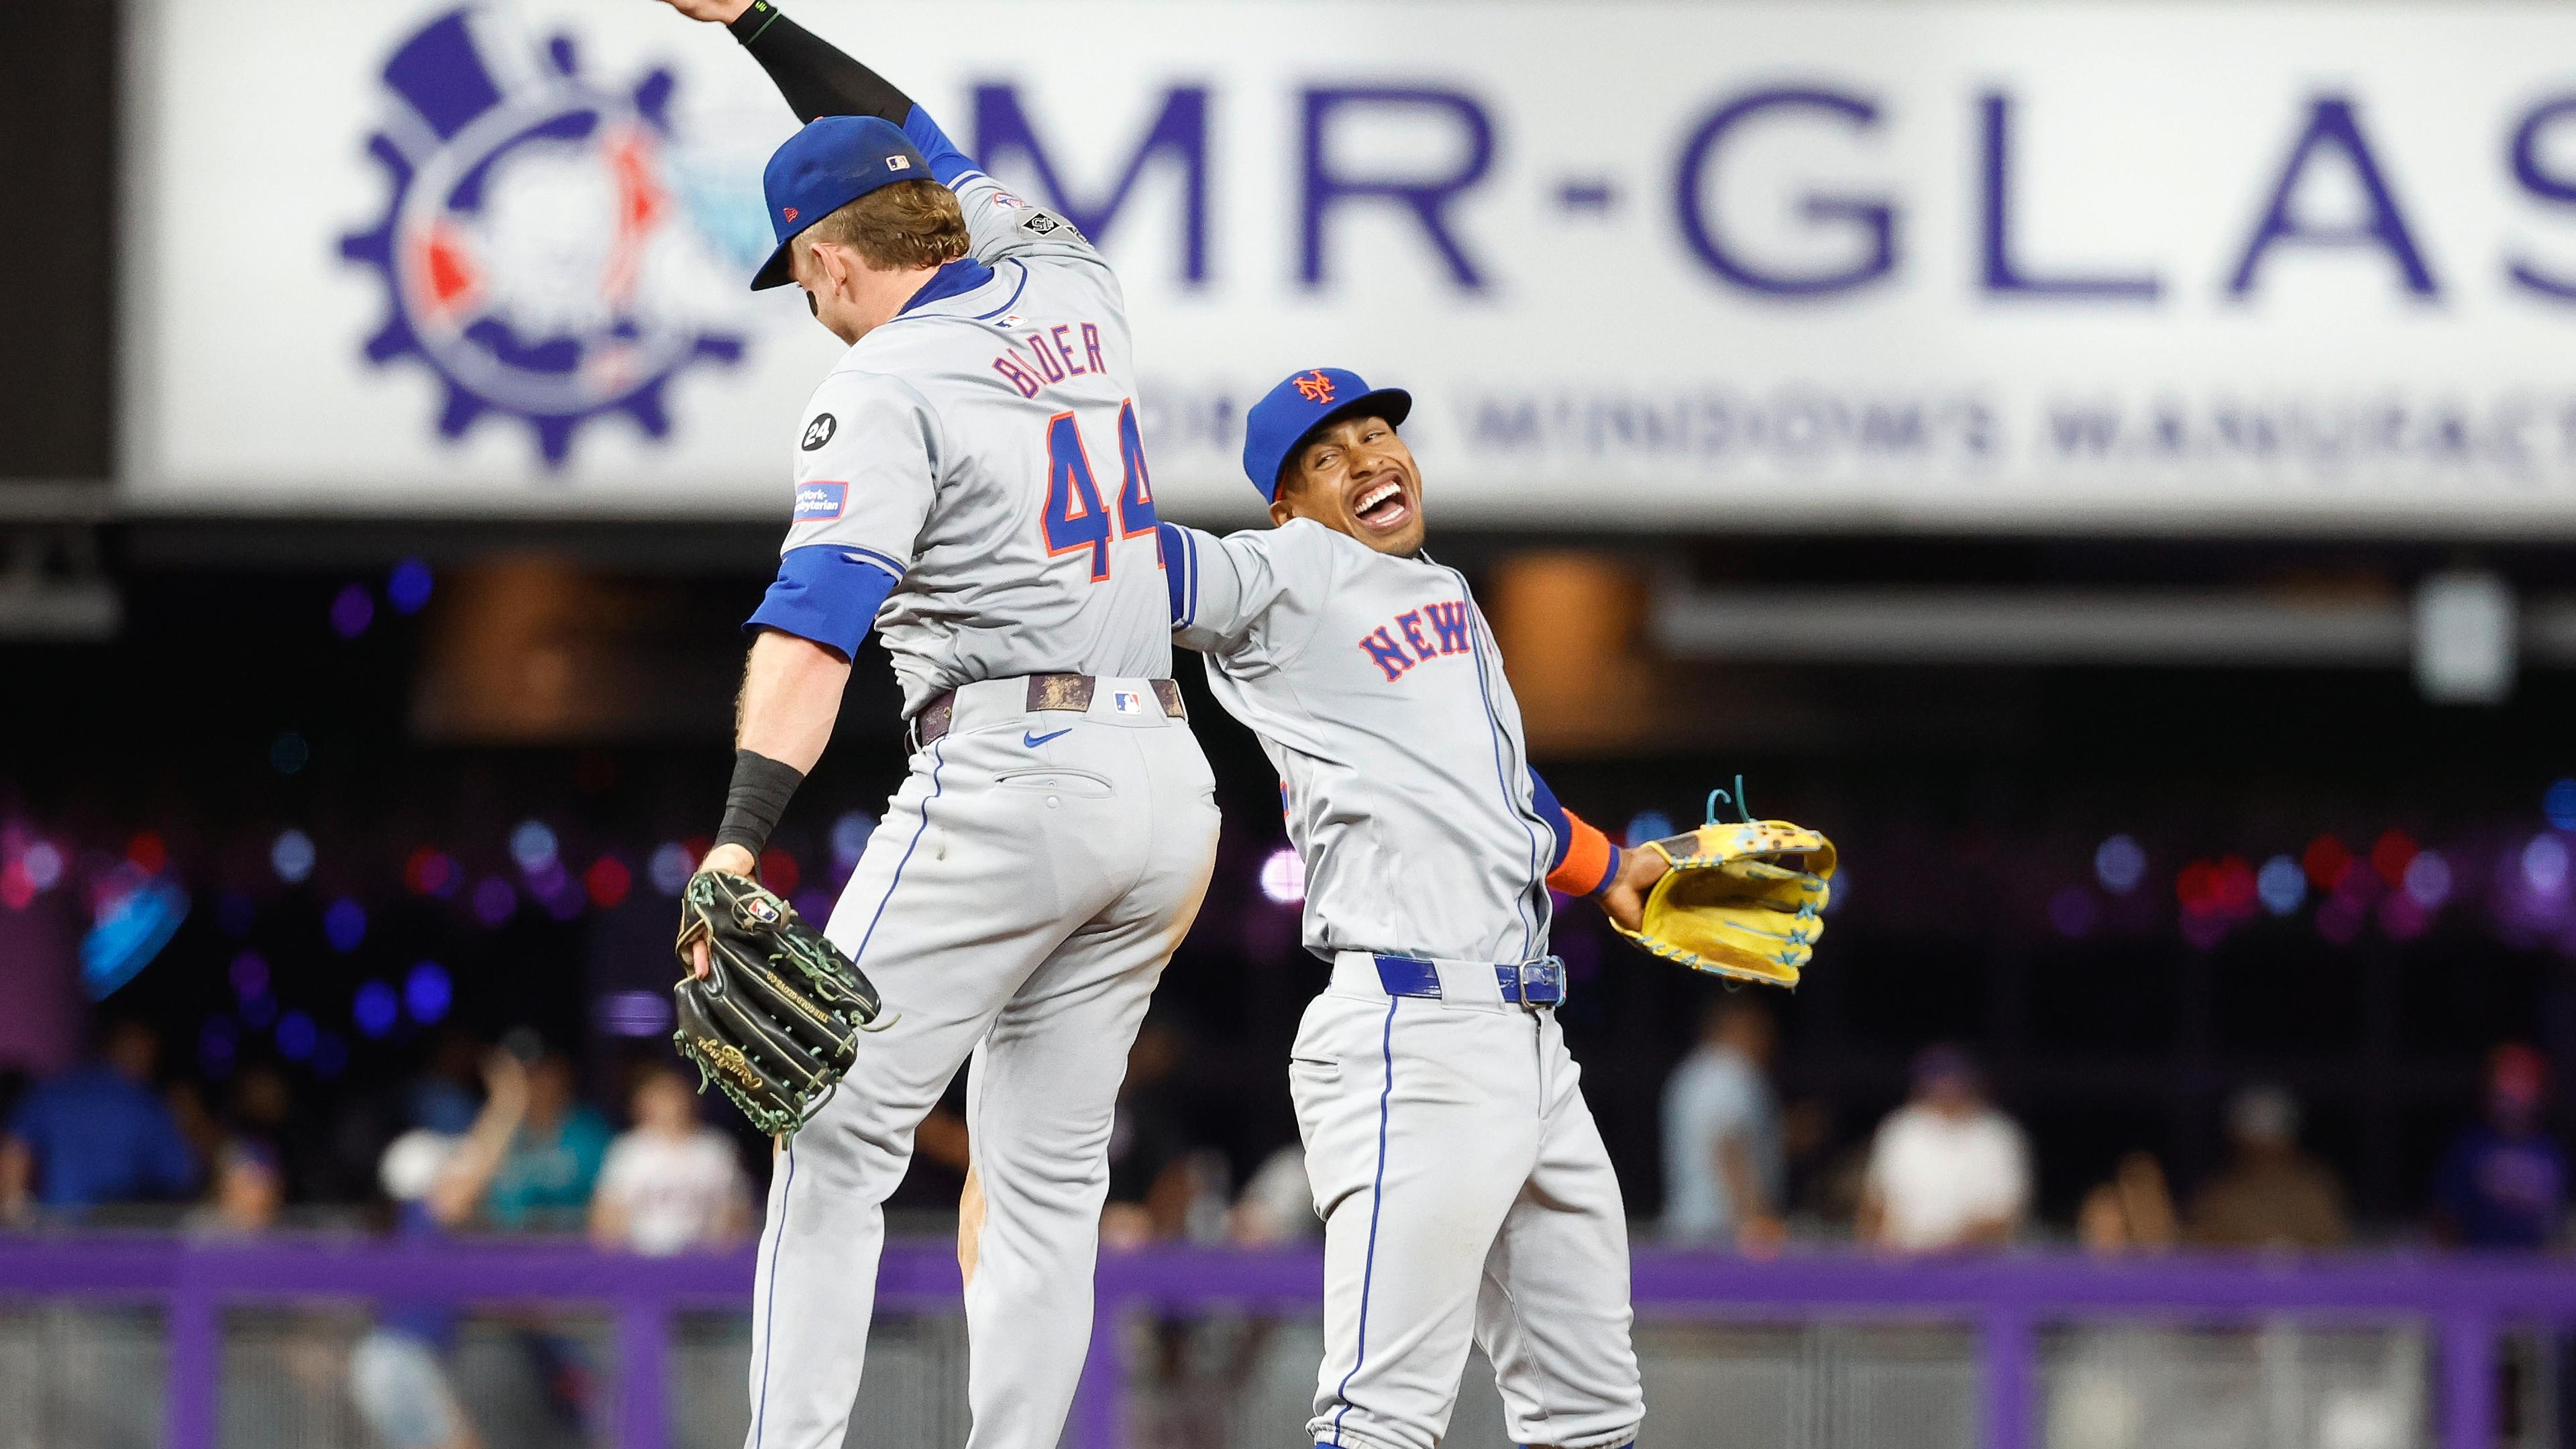 New York Mets shortstop Francisco Lindor (12) and center fielder Harrison Bader (44) celebrate their win against the Miami Marlins at loanDepot Park